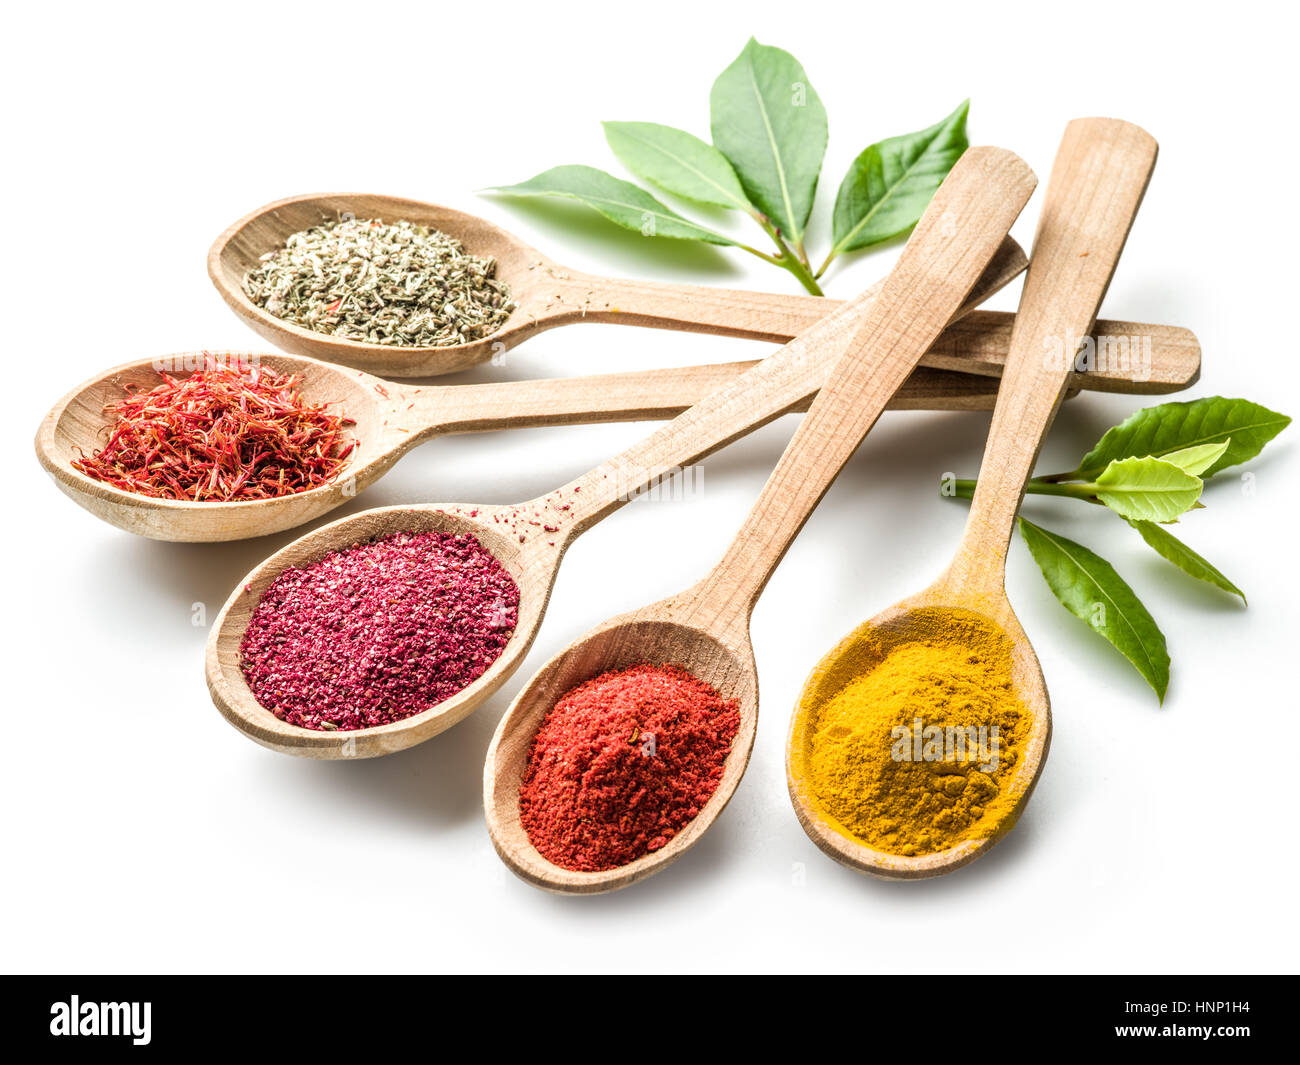 https://c8.alamy.com/comp/HNP1H4/assortment-of-colorful-spices-in-the-wooden-spoons-on-the-white-background-HNP1H4.jpg